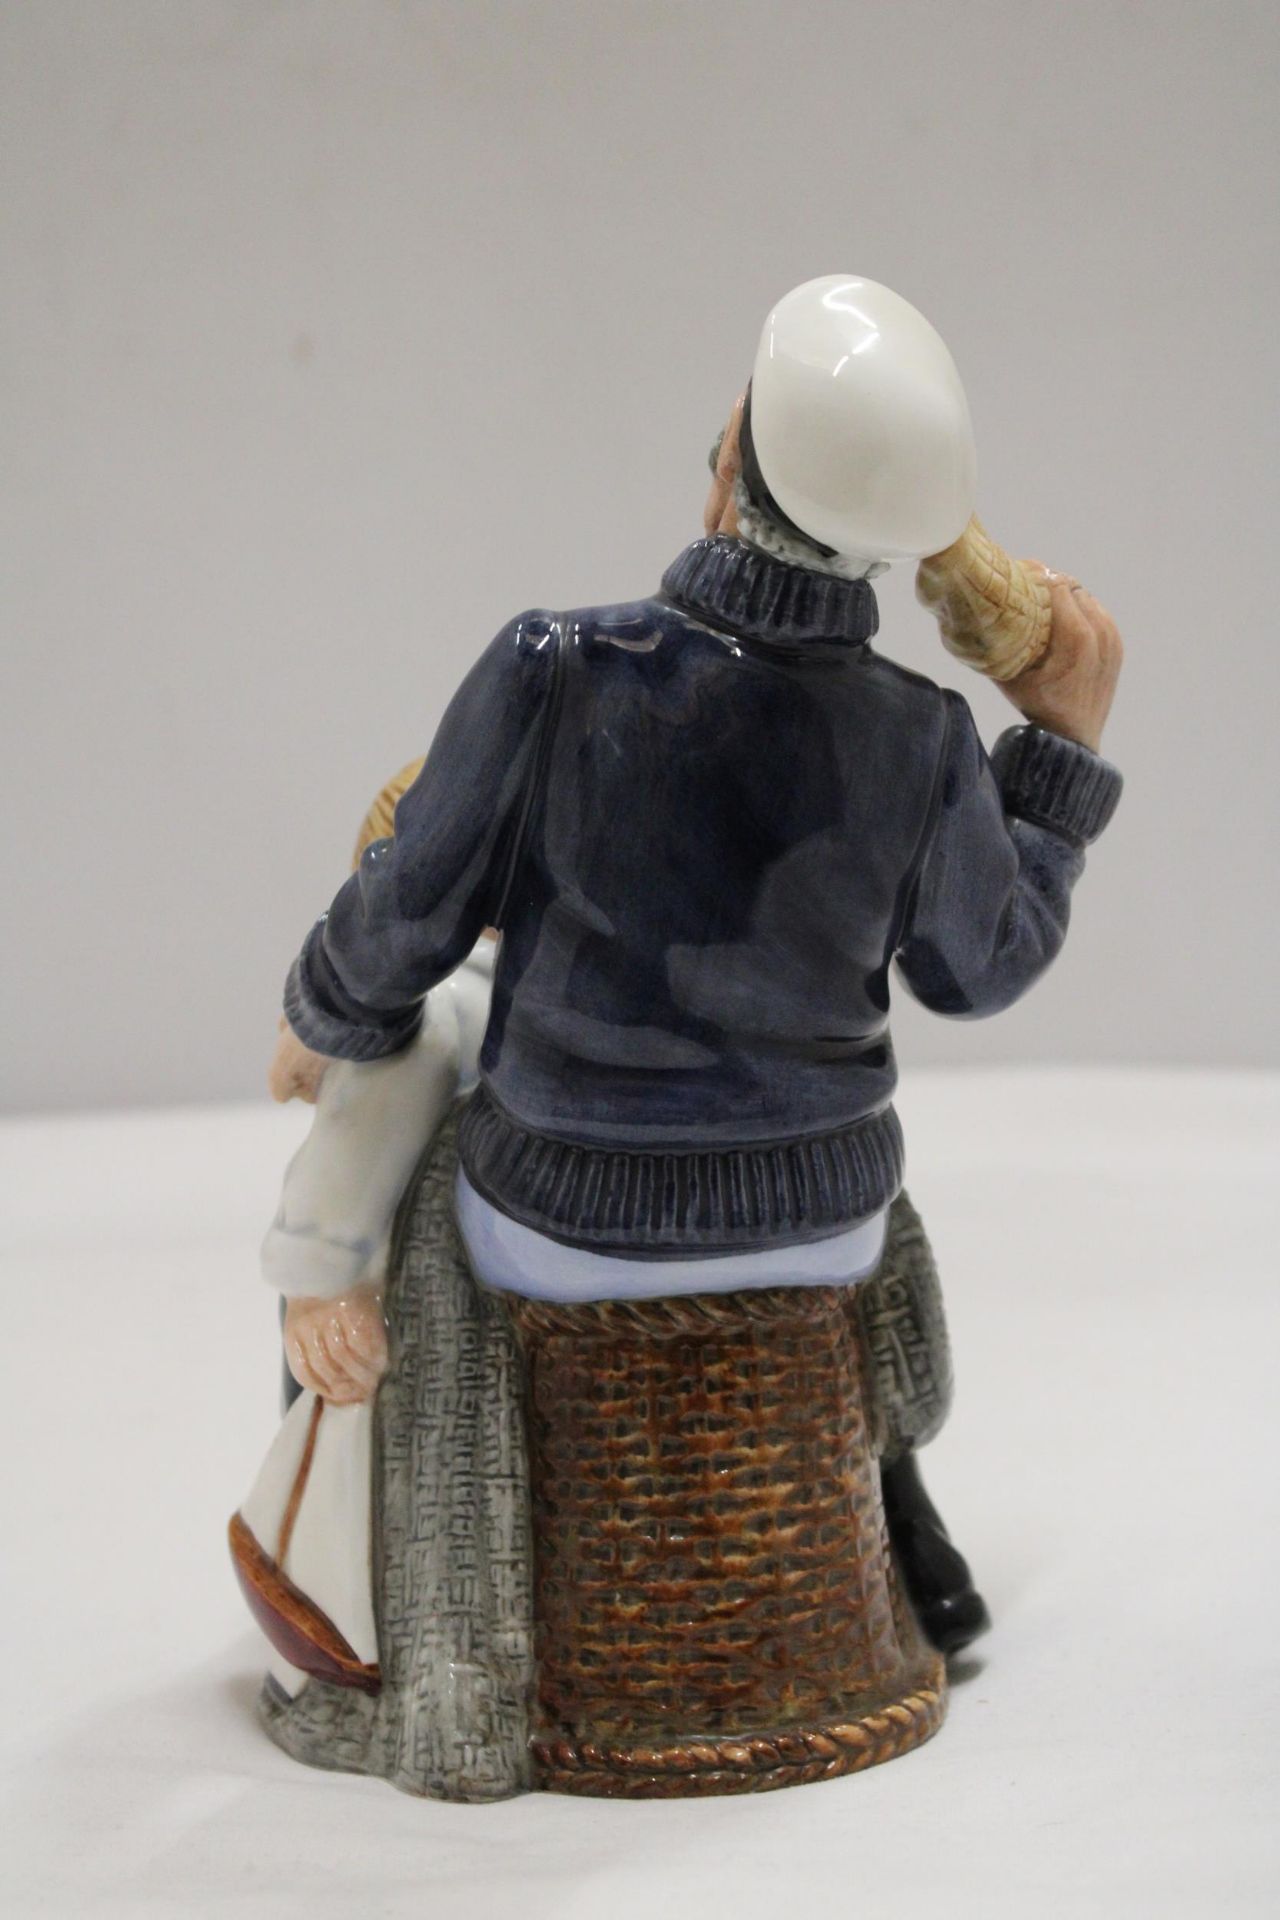 A ROYAL DOULTON FIGURE "SONG OF THE SEA" HN 2729 - Image 4 of 6